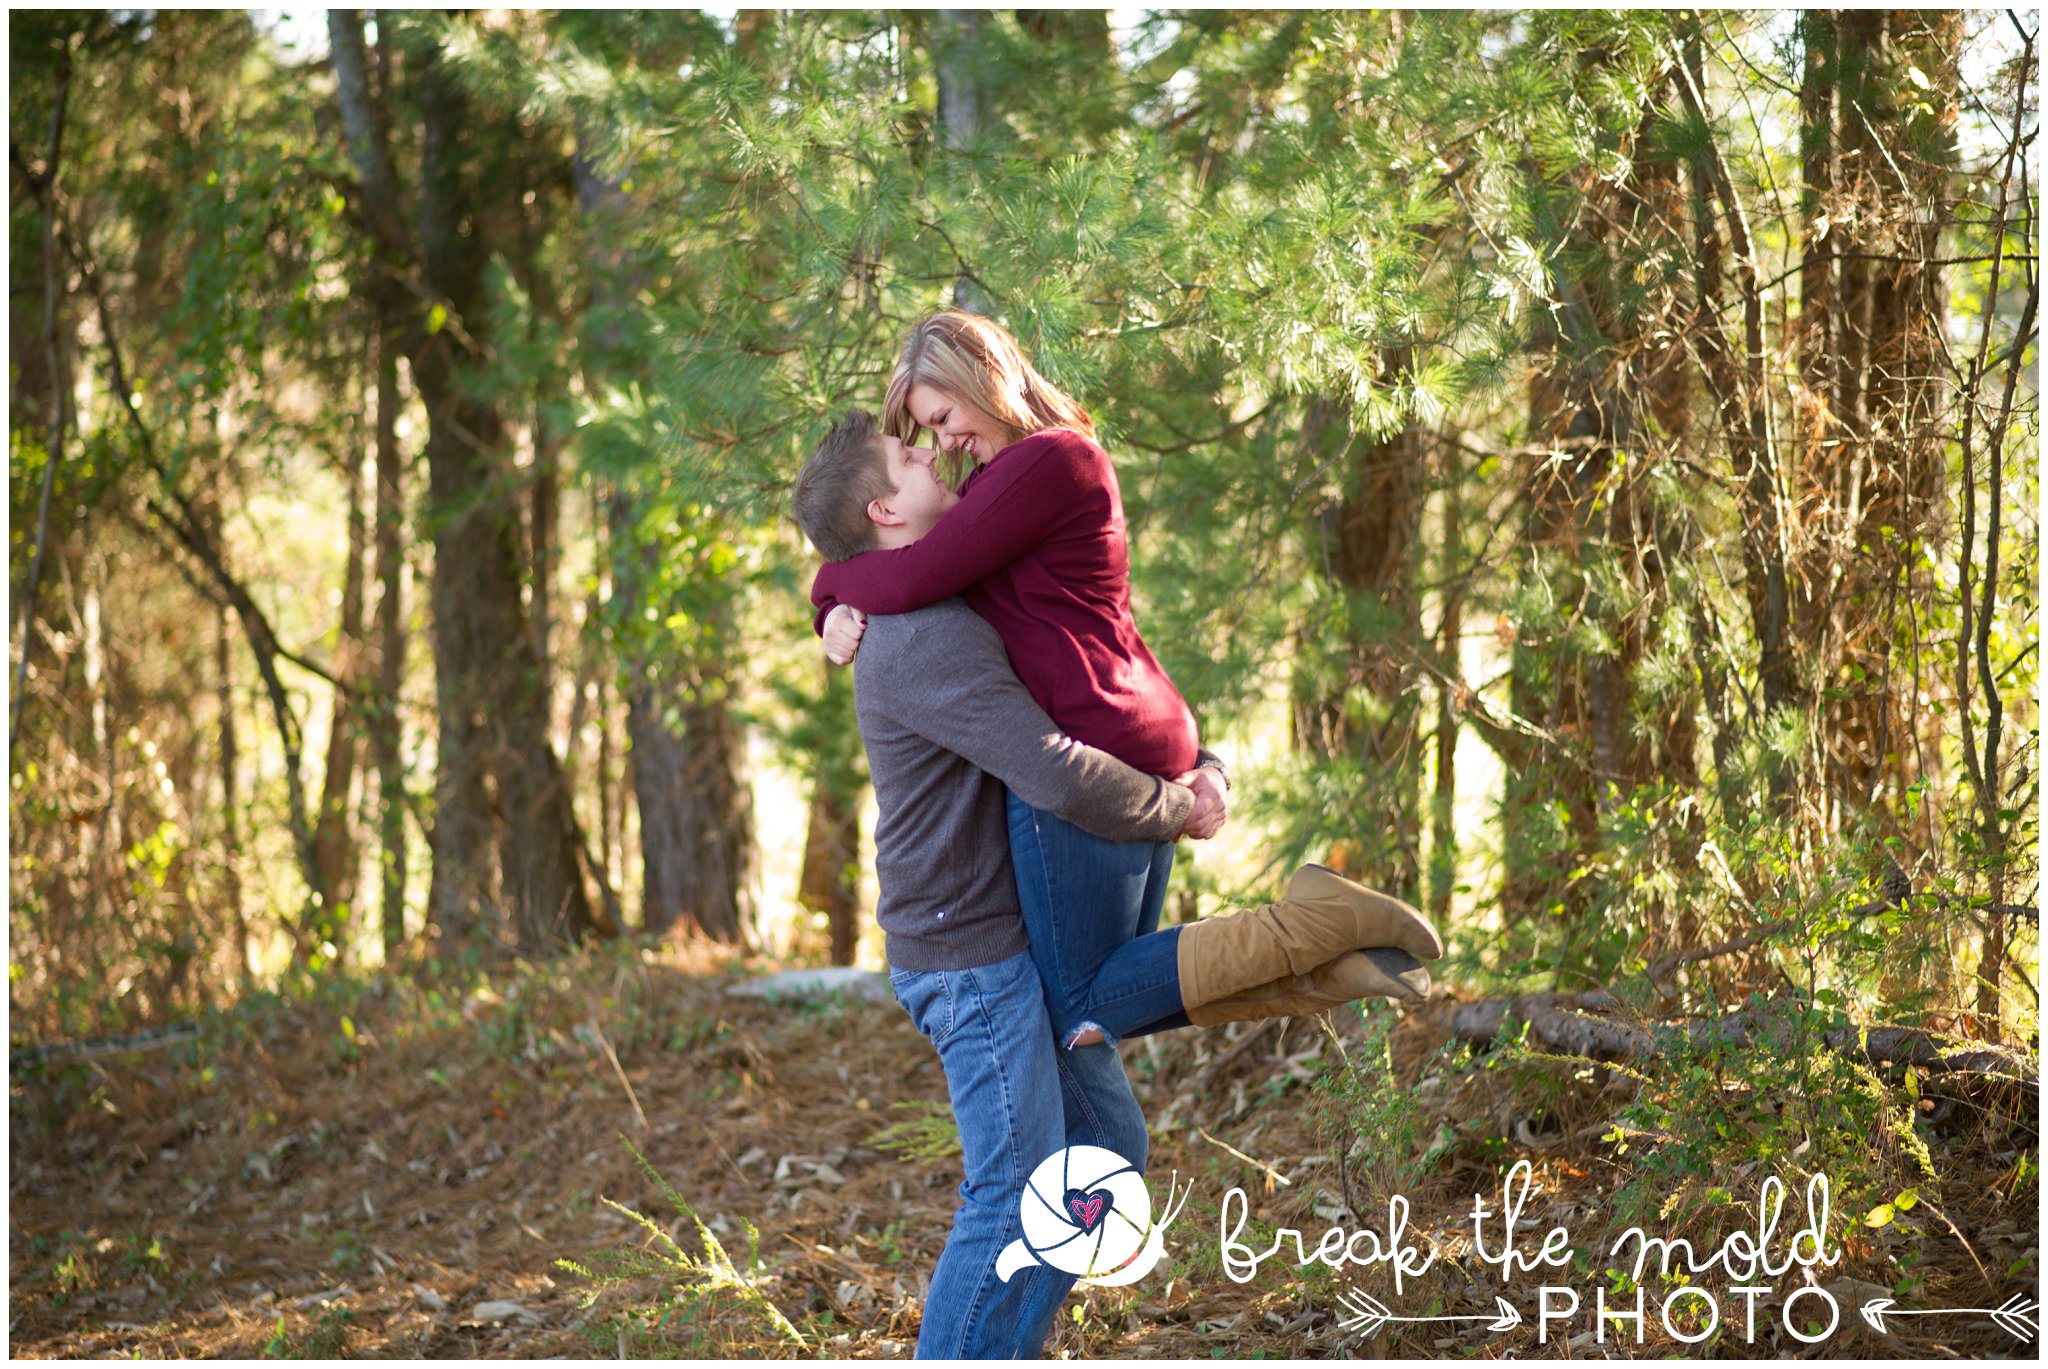 break-the-mold-photo-field-country-engagement-winter-shoot_6638.jpg